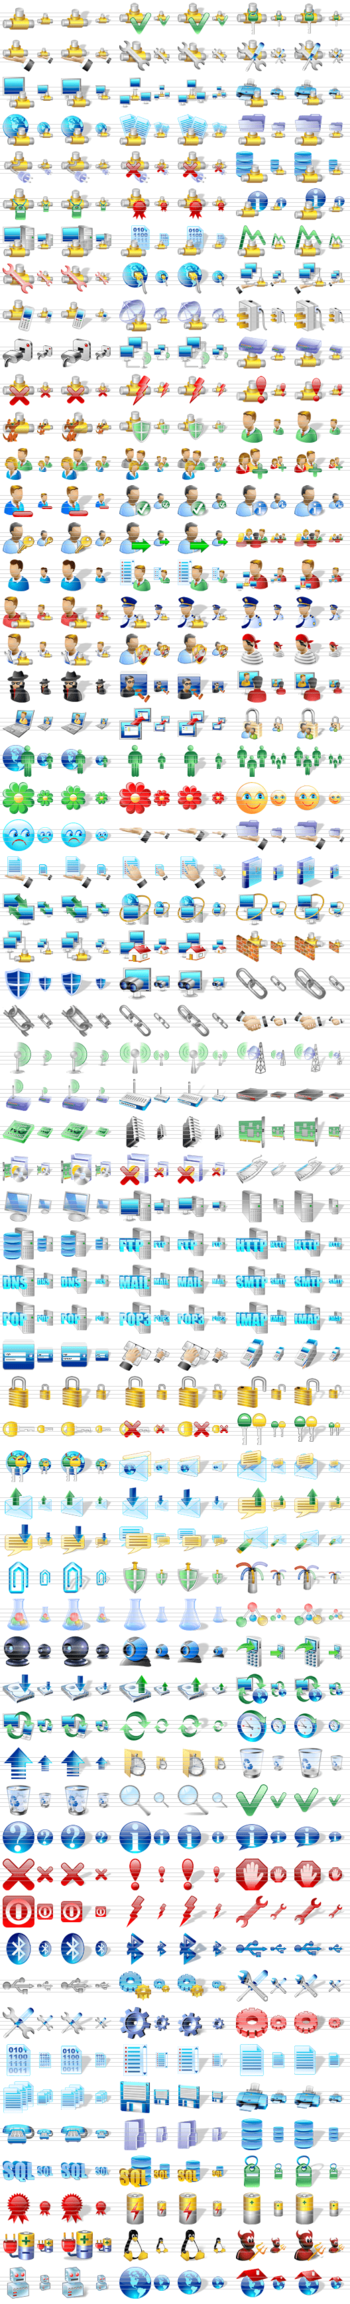 Network Icon Library screenshot